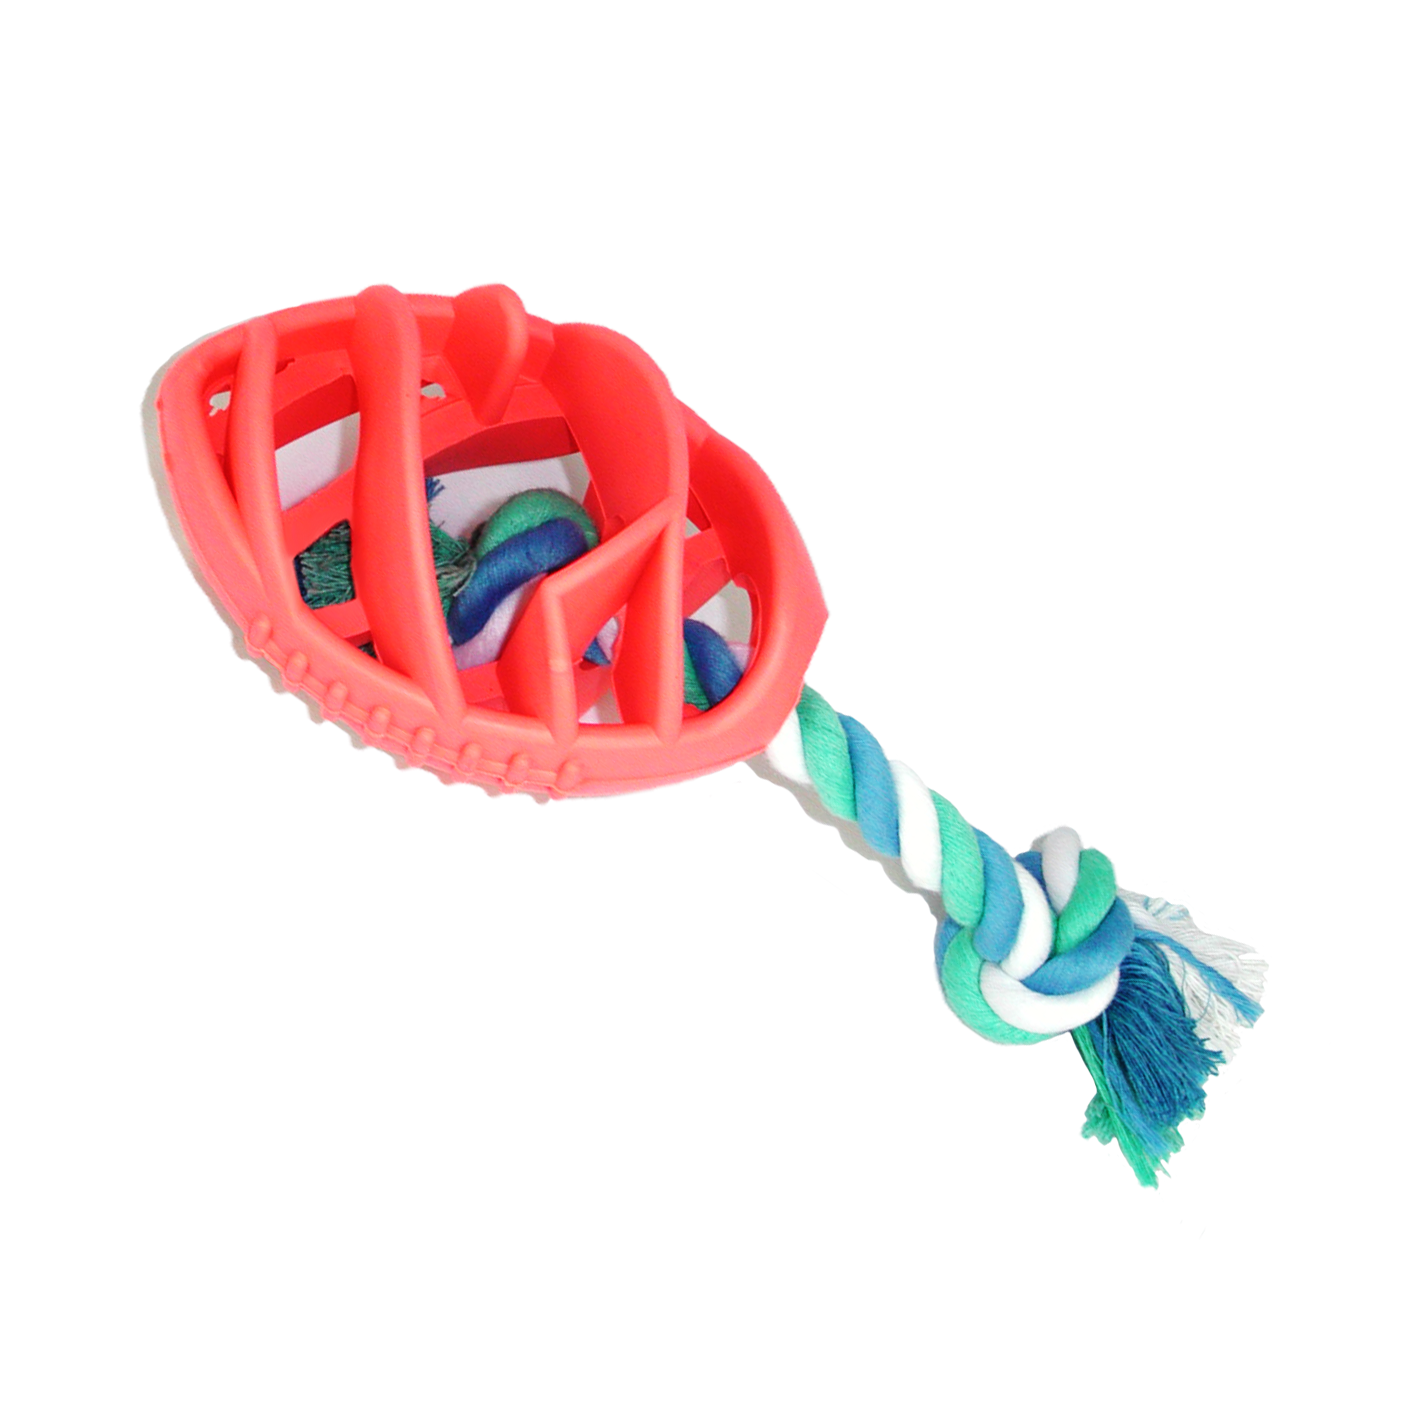 Rubber Football Dog Chew Toy with Tug Rope | PetPals® - Stringspeed